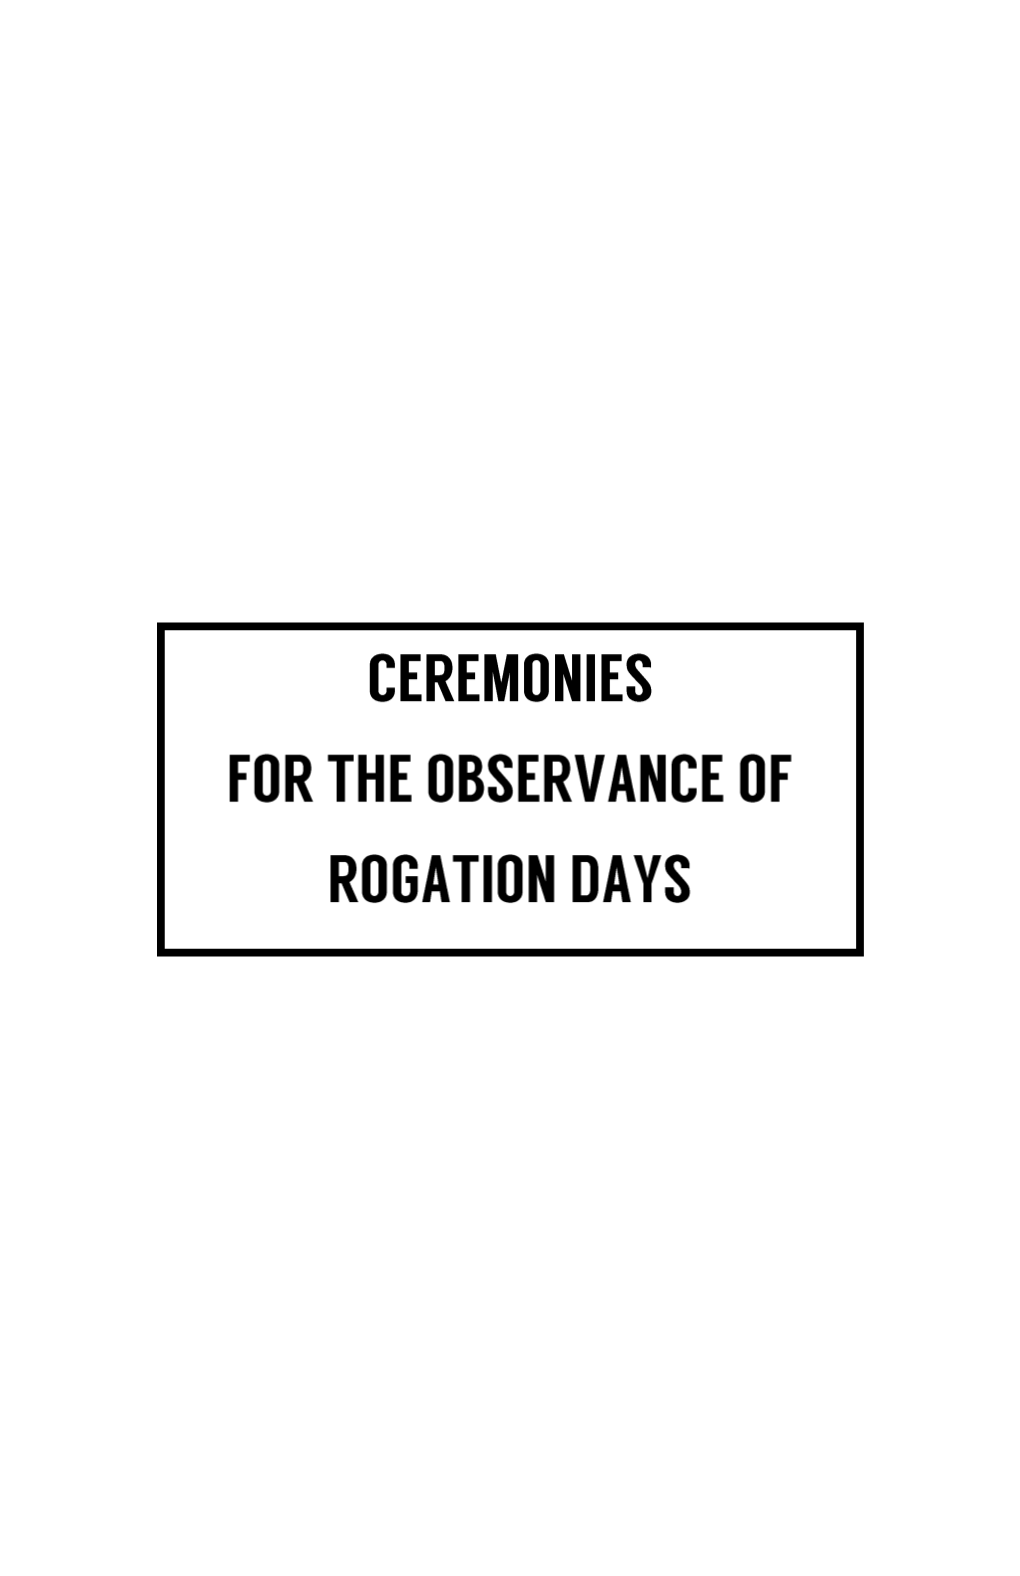 Ceremonies for the Observance of Rogation Days